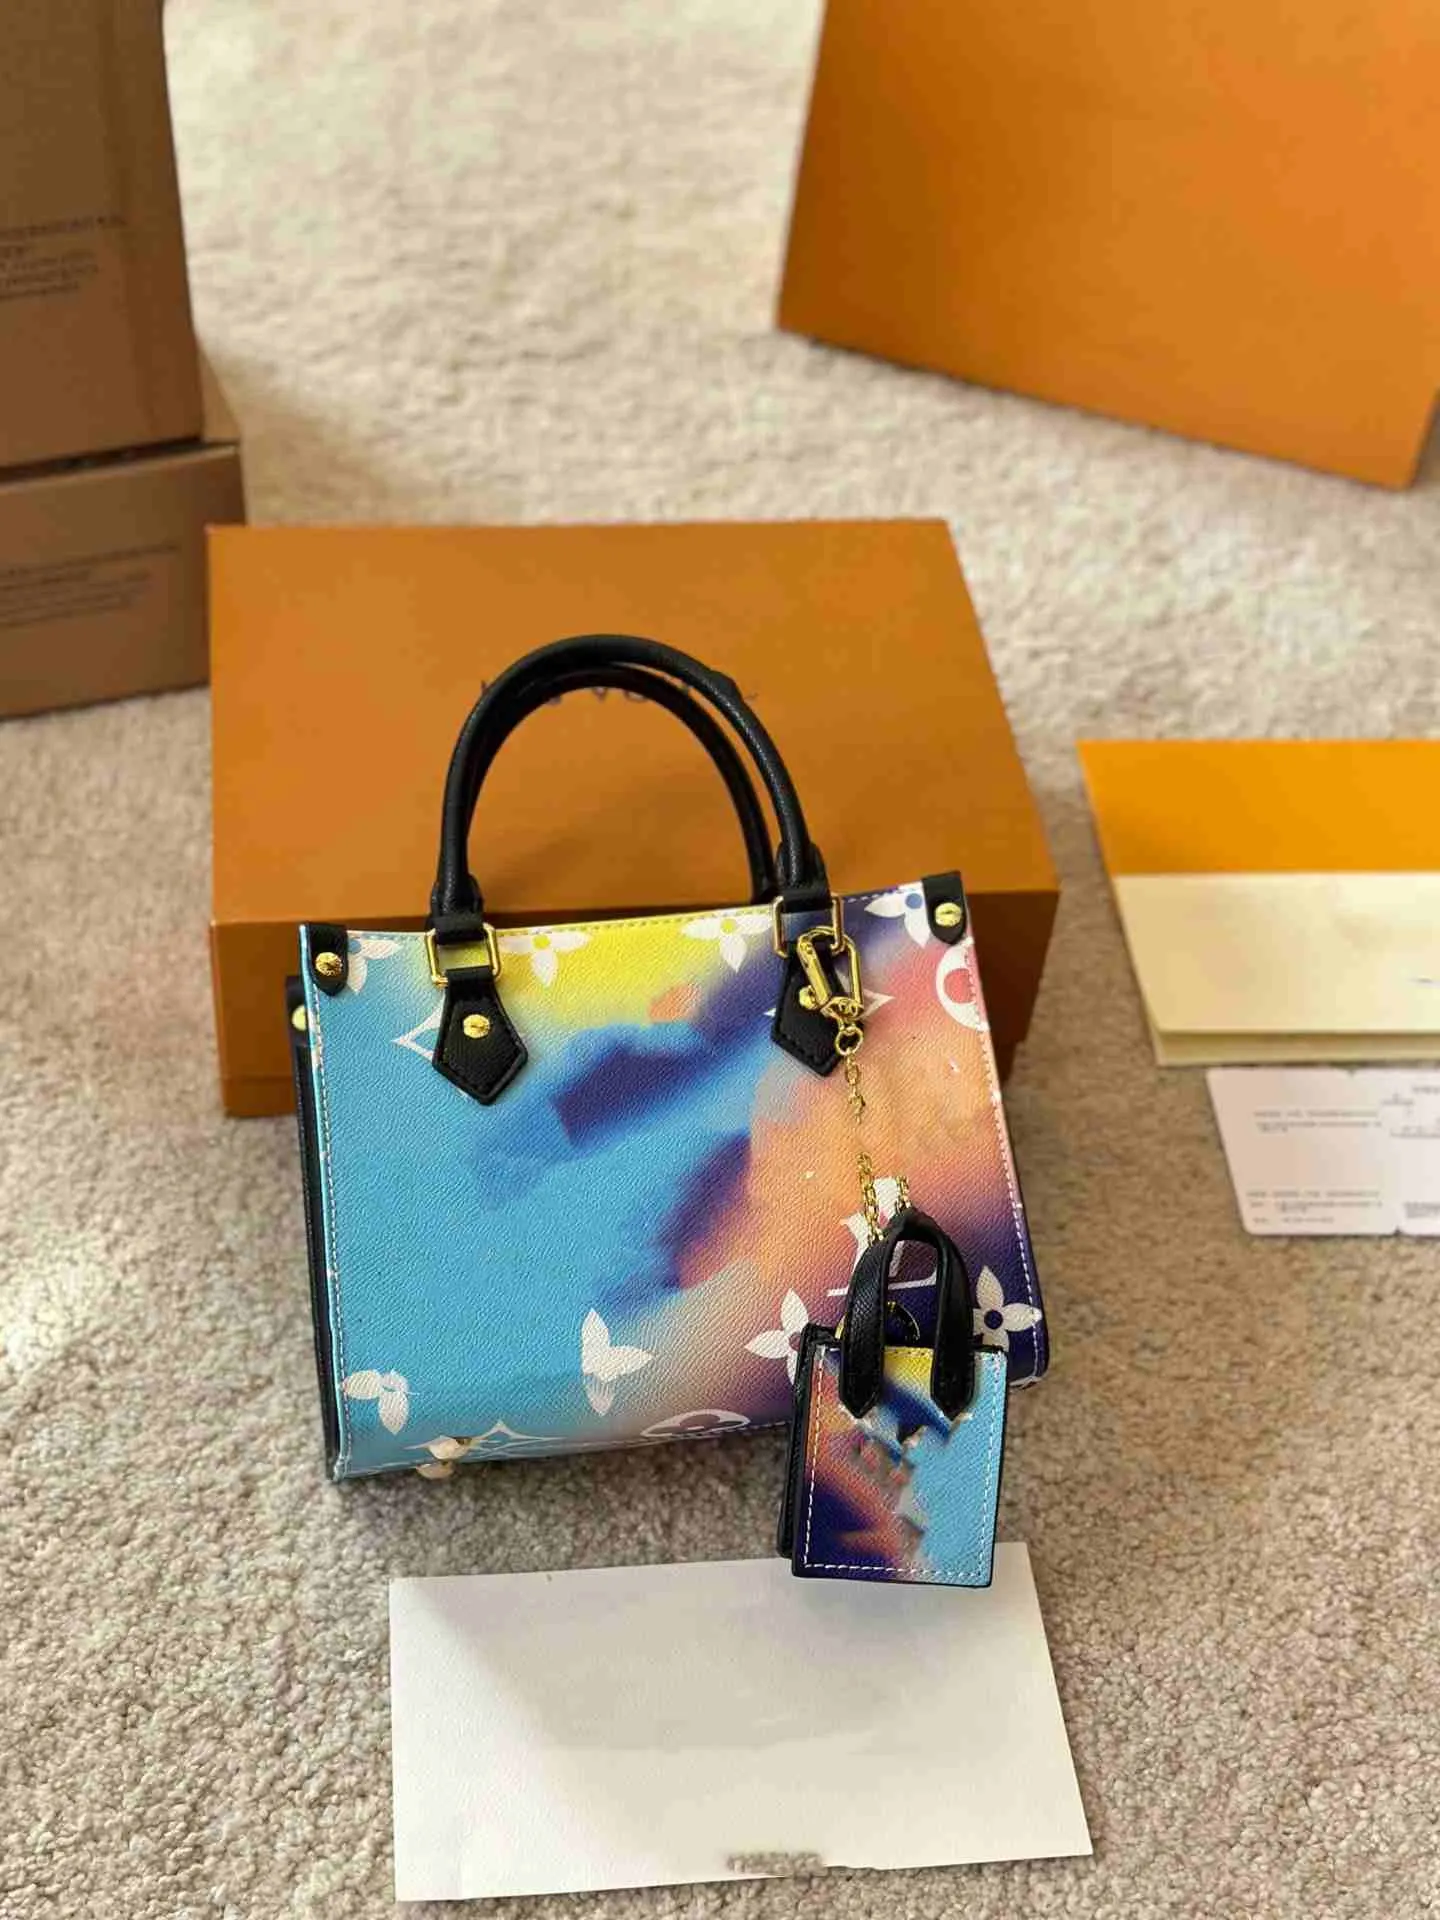 Luxury Designer Tote Dyed Printing Mini Totes Women The Tote Bags Color Contrast Handbag Crossbody Bag Shoulder Bags Fashion Unique Shopping Bag